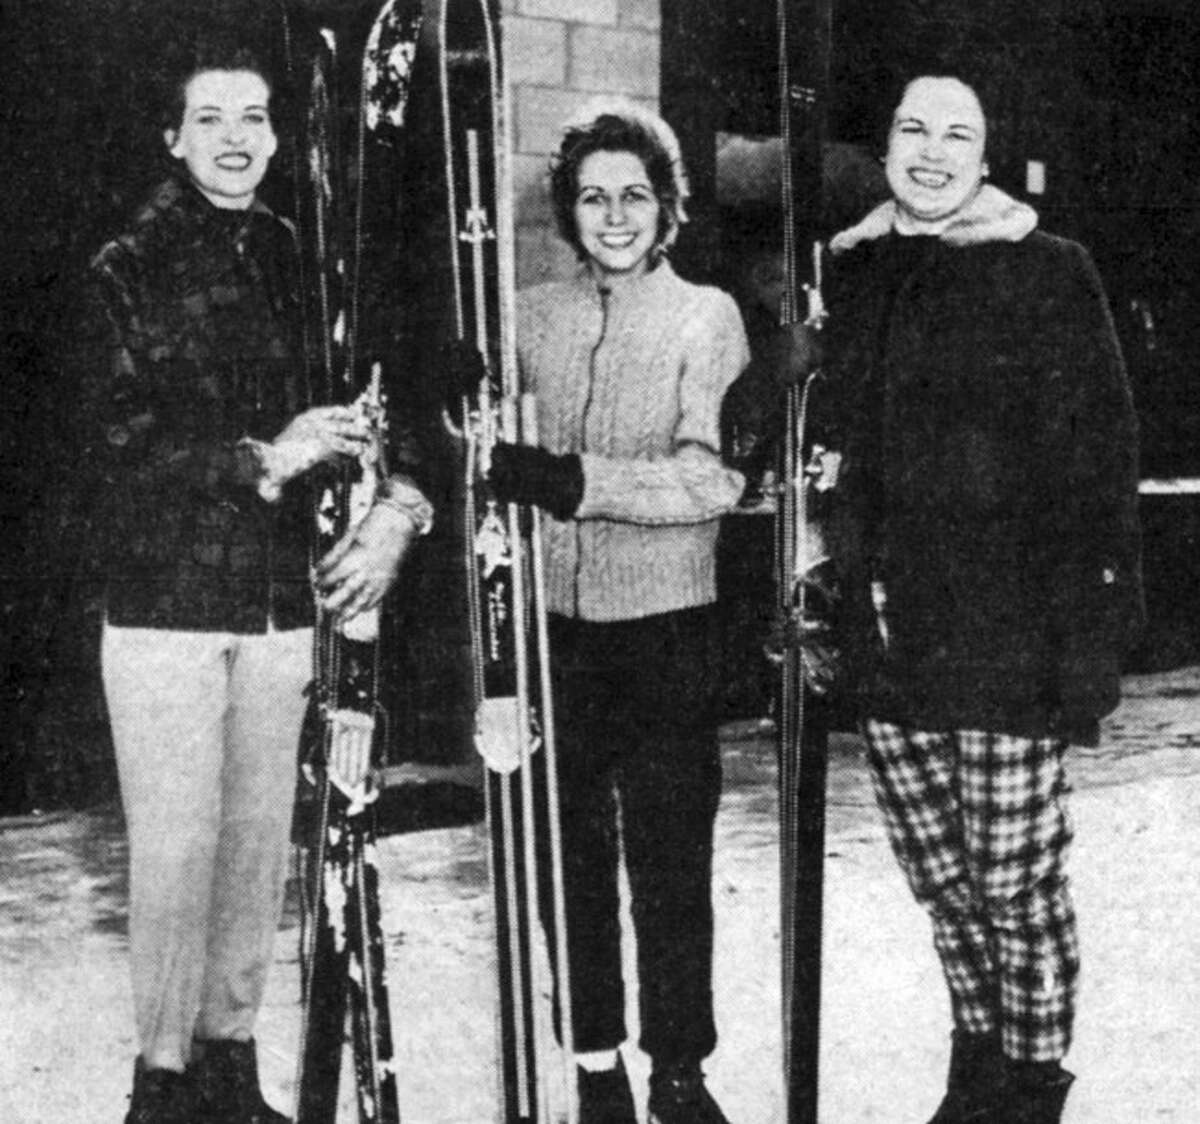 These three ladies enjoy a day of skiing at Bear Hills in the 1950s.